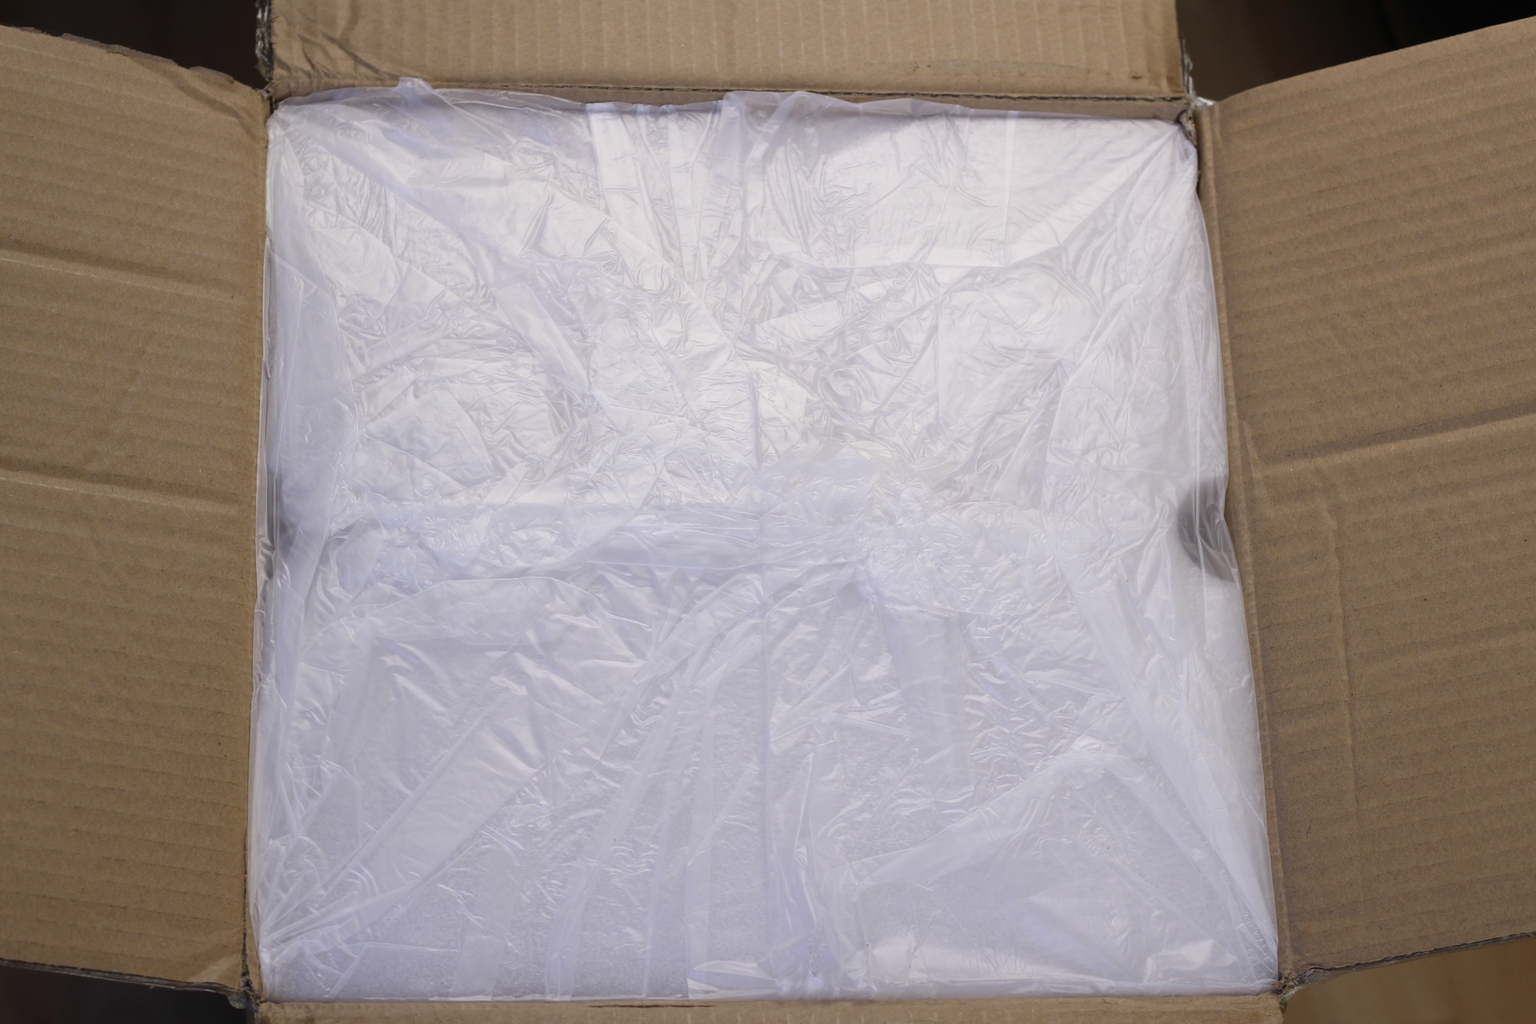 Anycubic Photon M3 Review Packaging5 | Anycubic Photon M3 Review: Bridging the gap